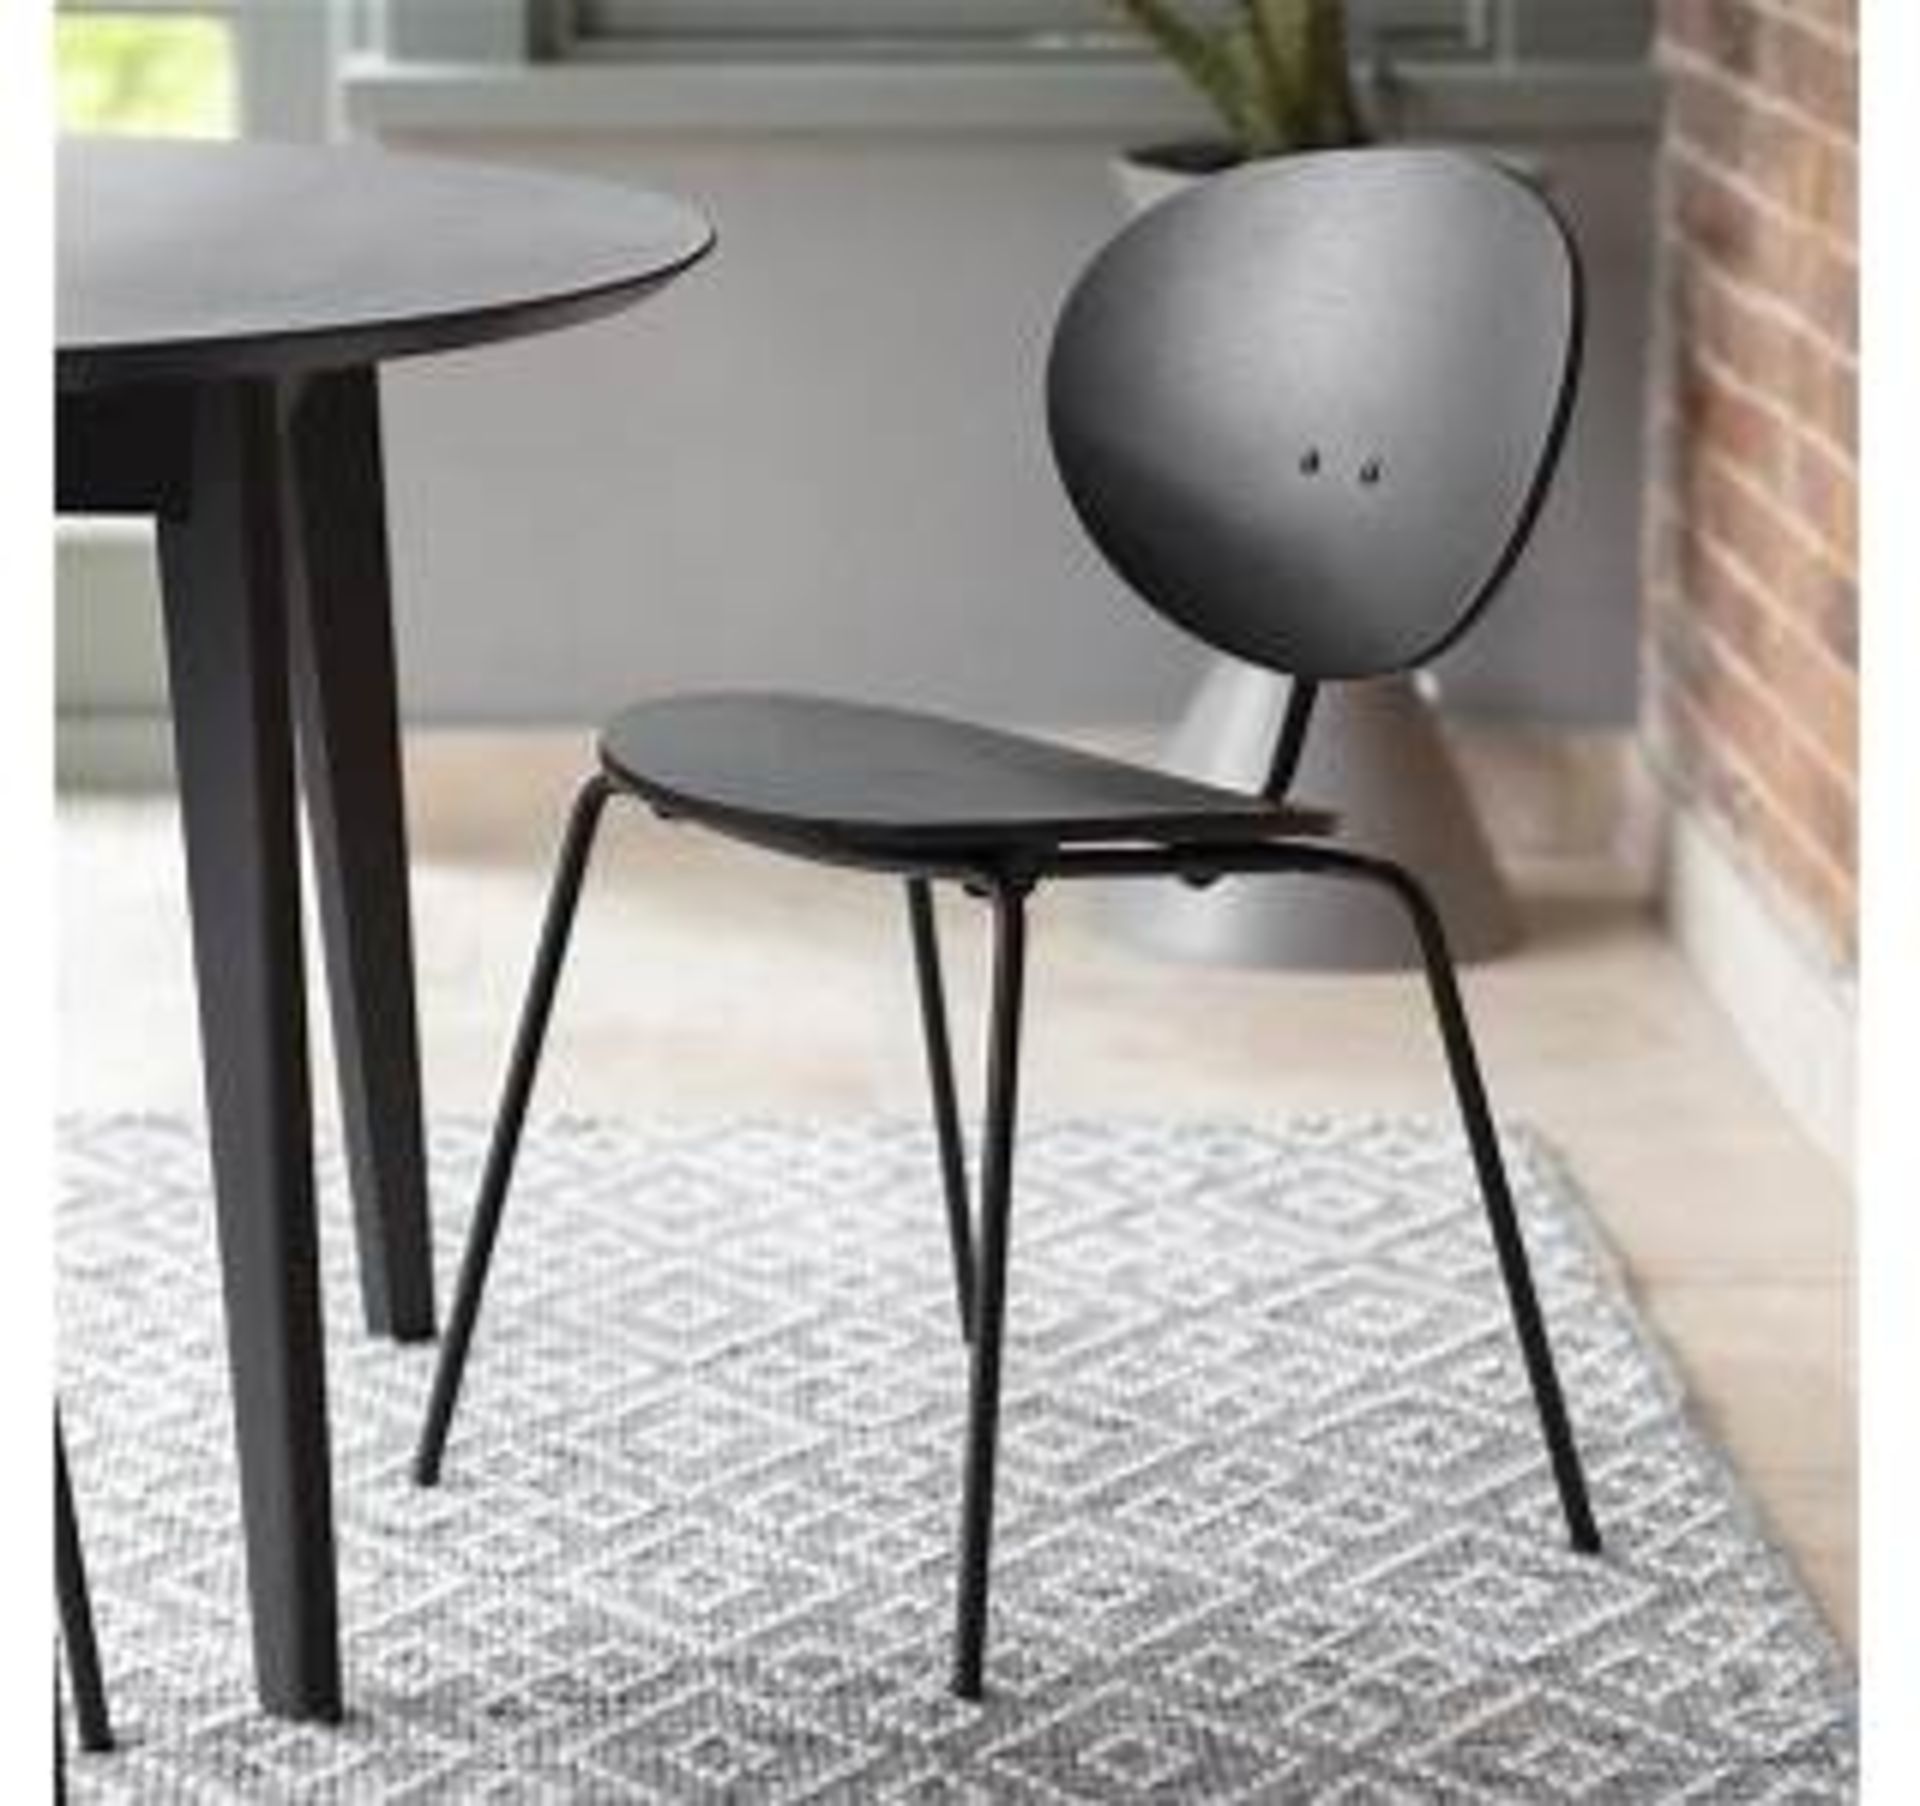 Sidcup Dining Chair Grey 2pk The Sidcup Grey Dining Chair Offers A Modern Design And Matches